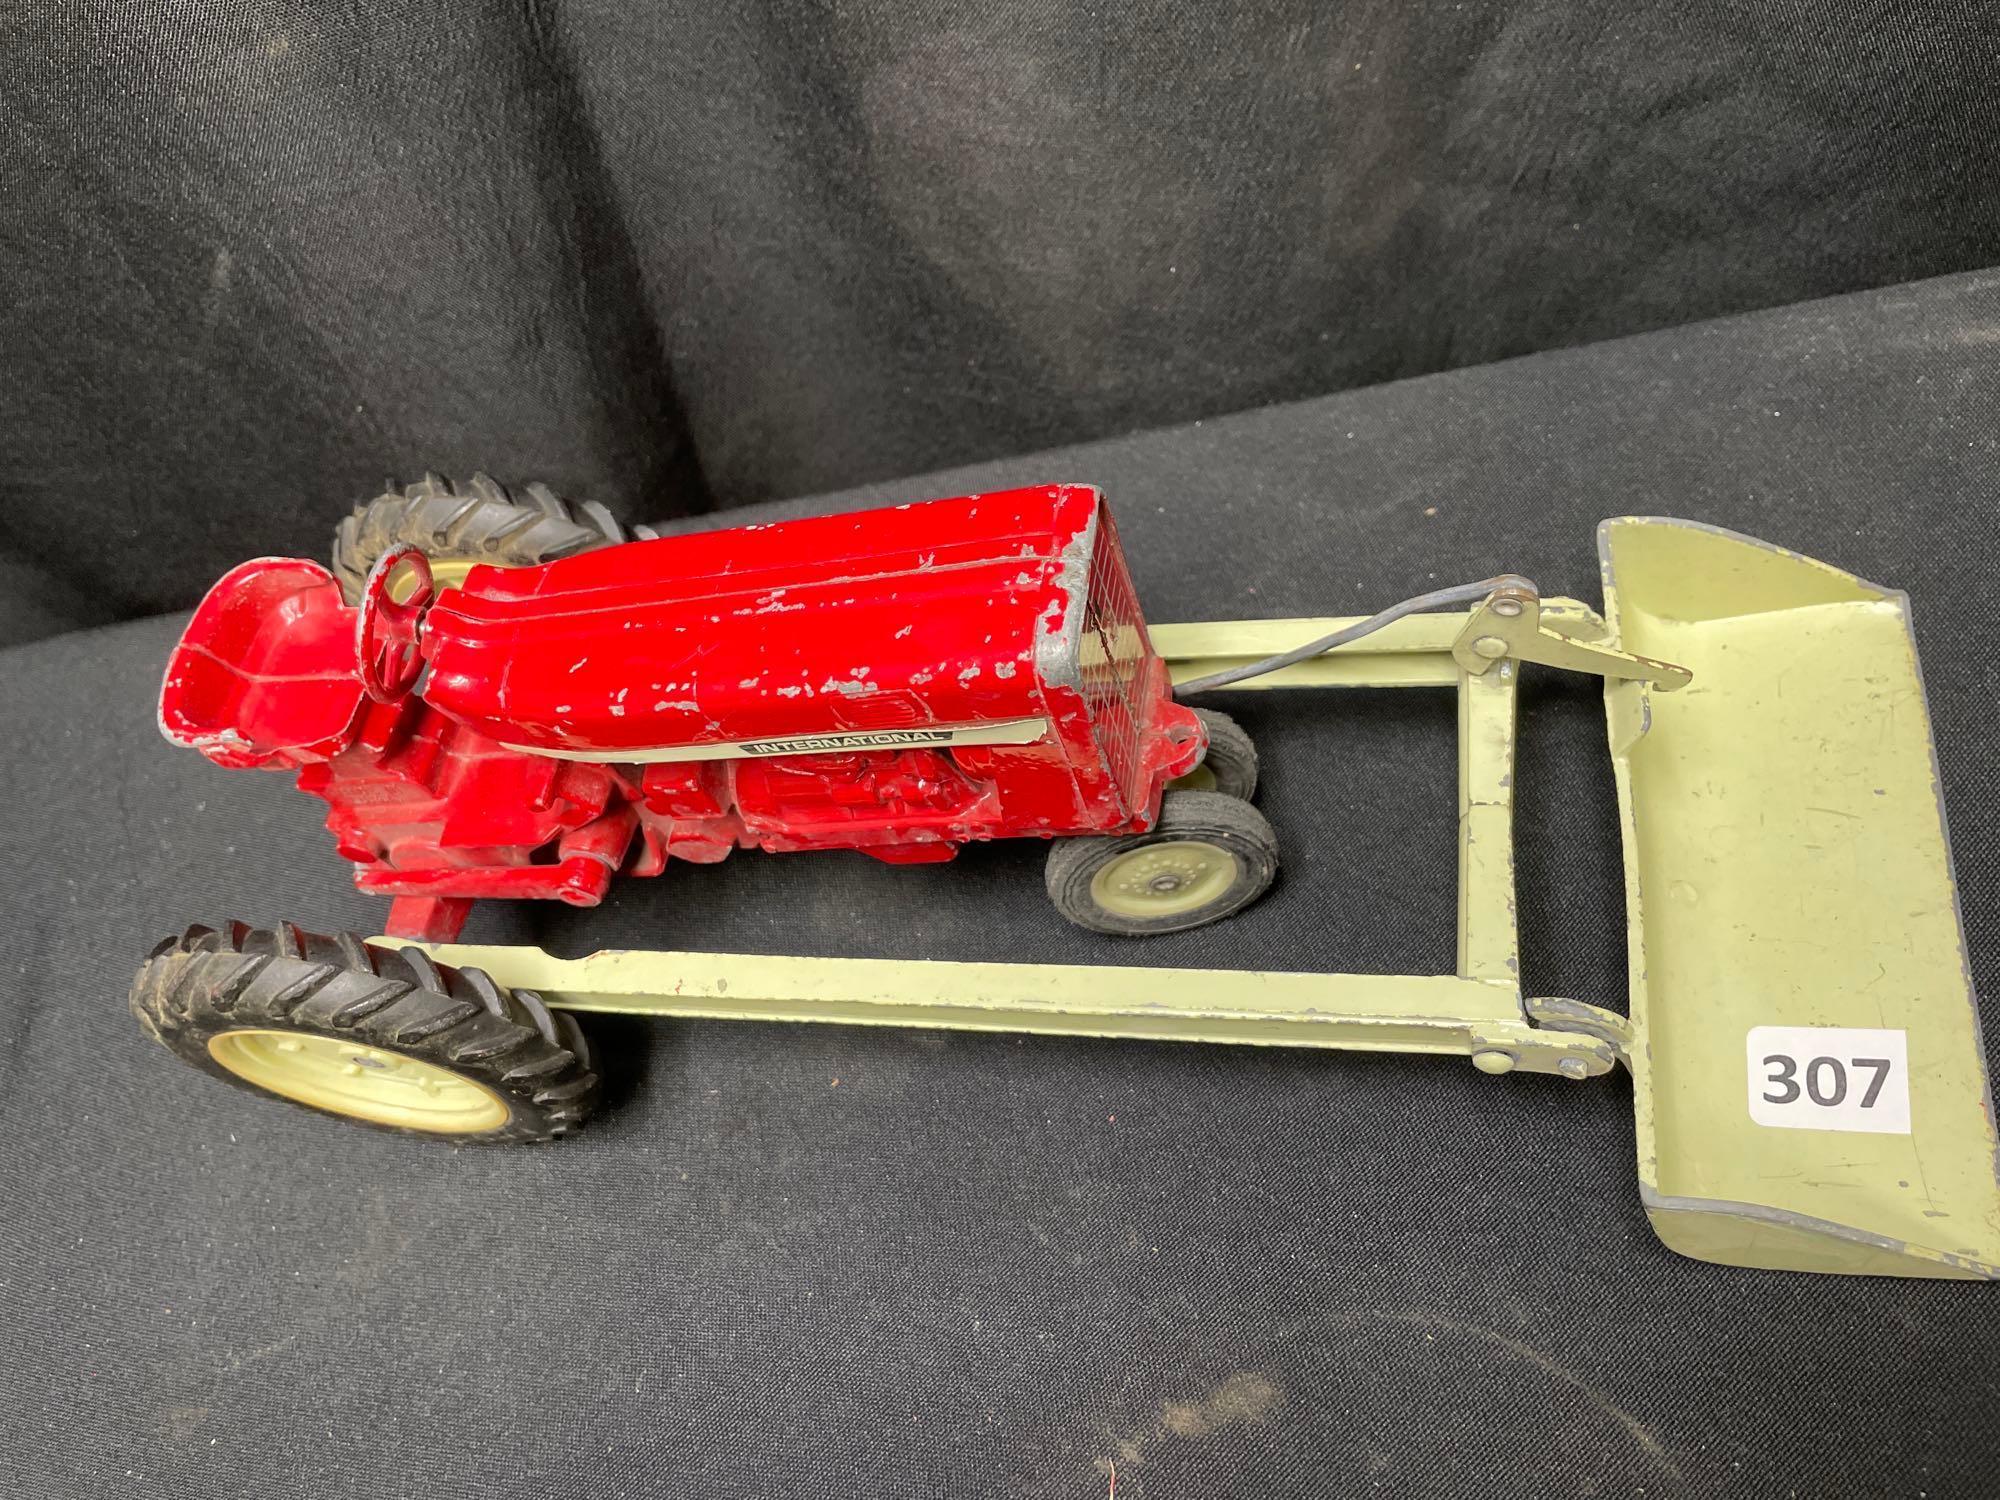 1/16th Scale IH Tractor with Loader - raise lever broken